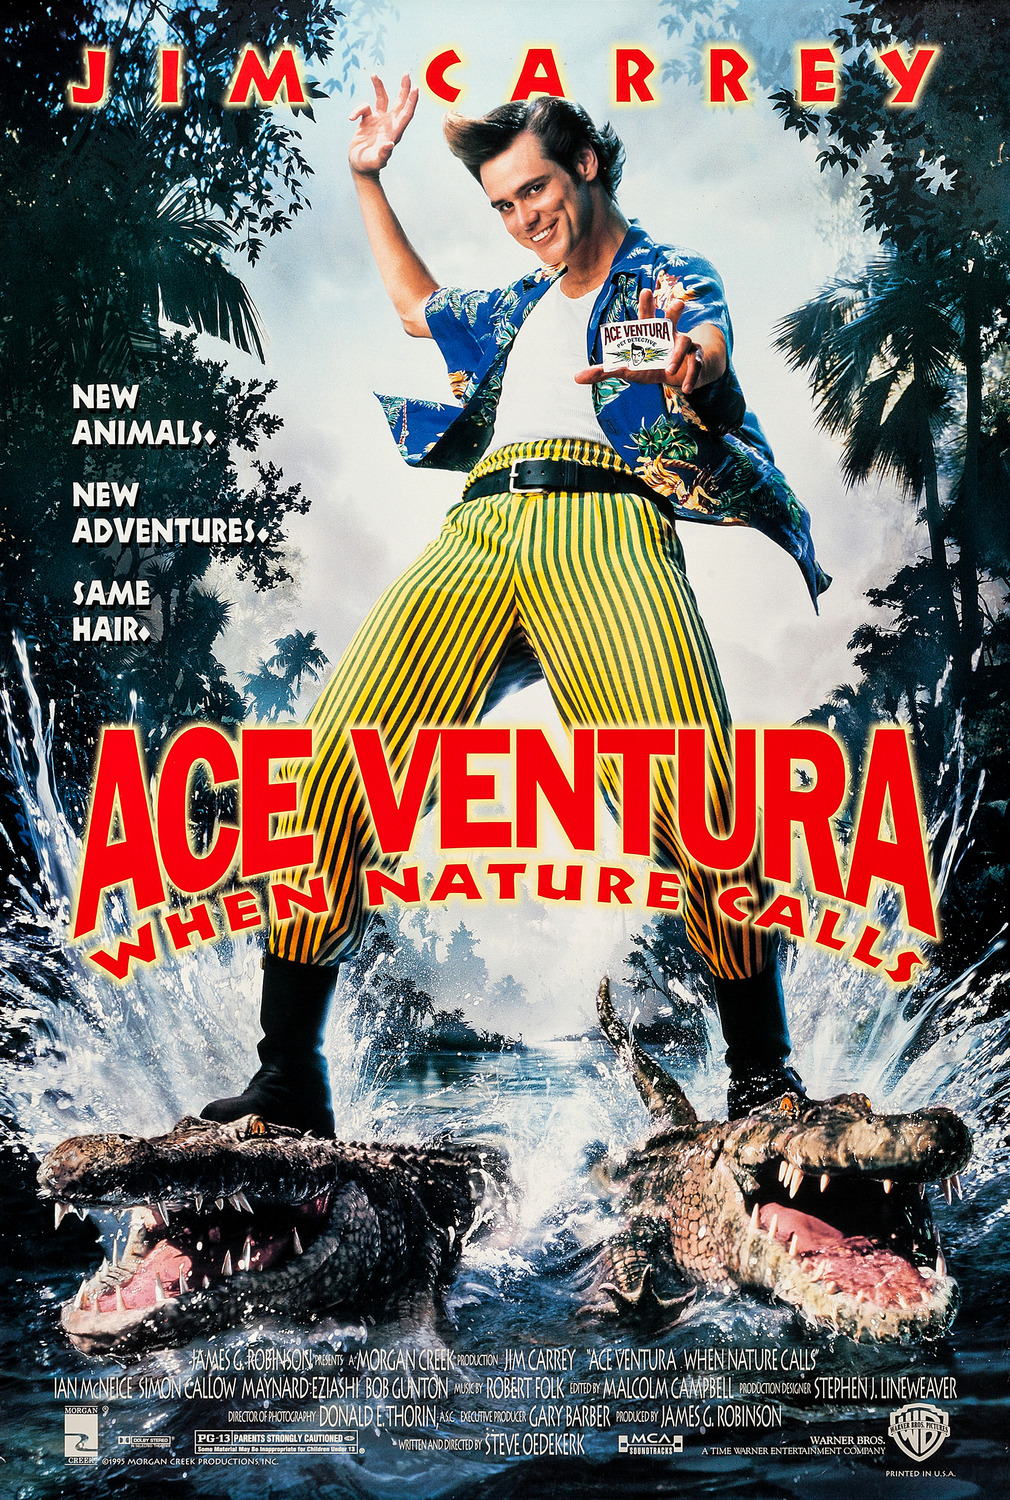 Extra Large Movie Poster Image for Ace Ventura: When Nature Calls 